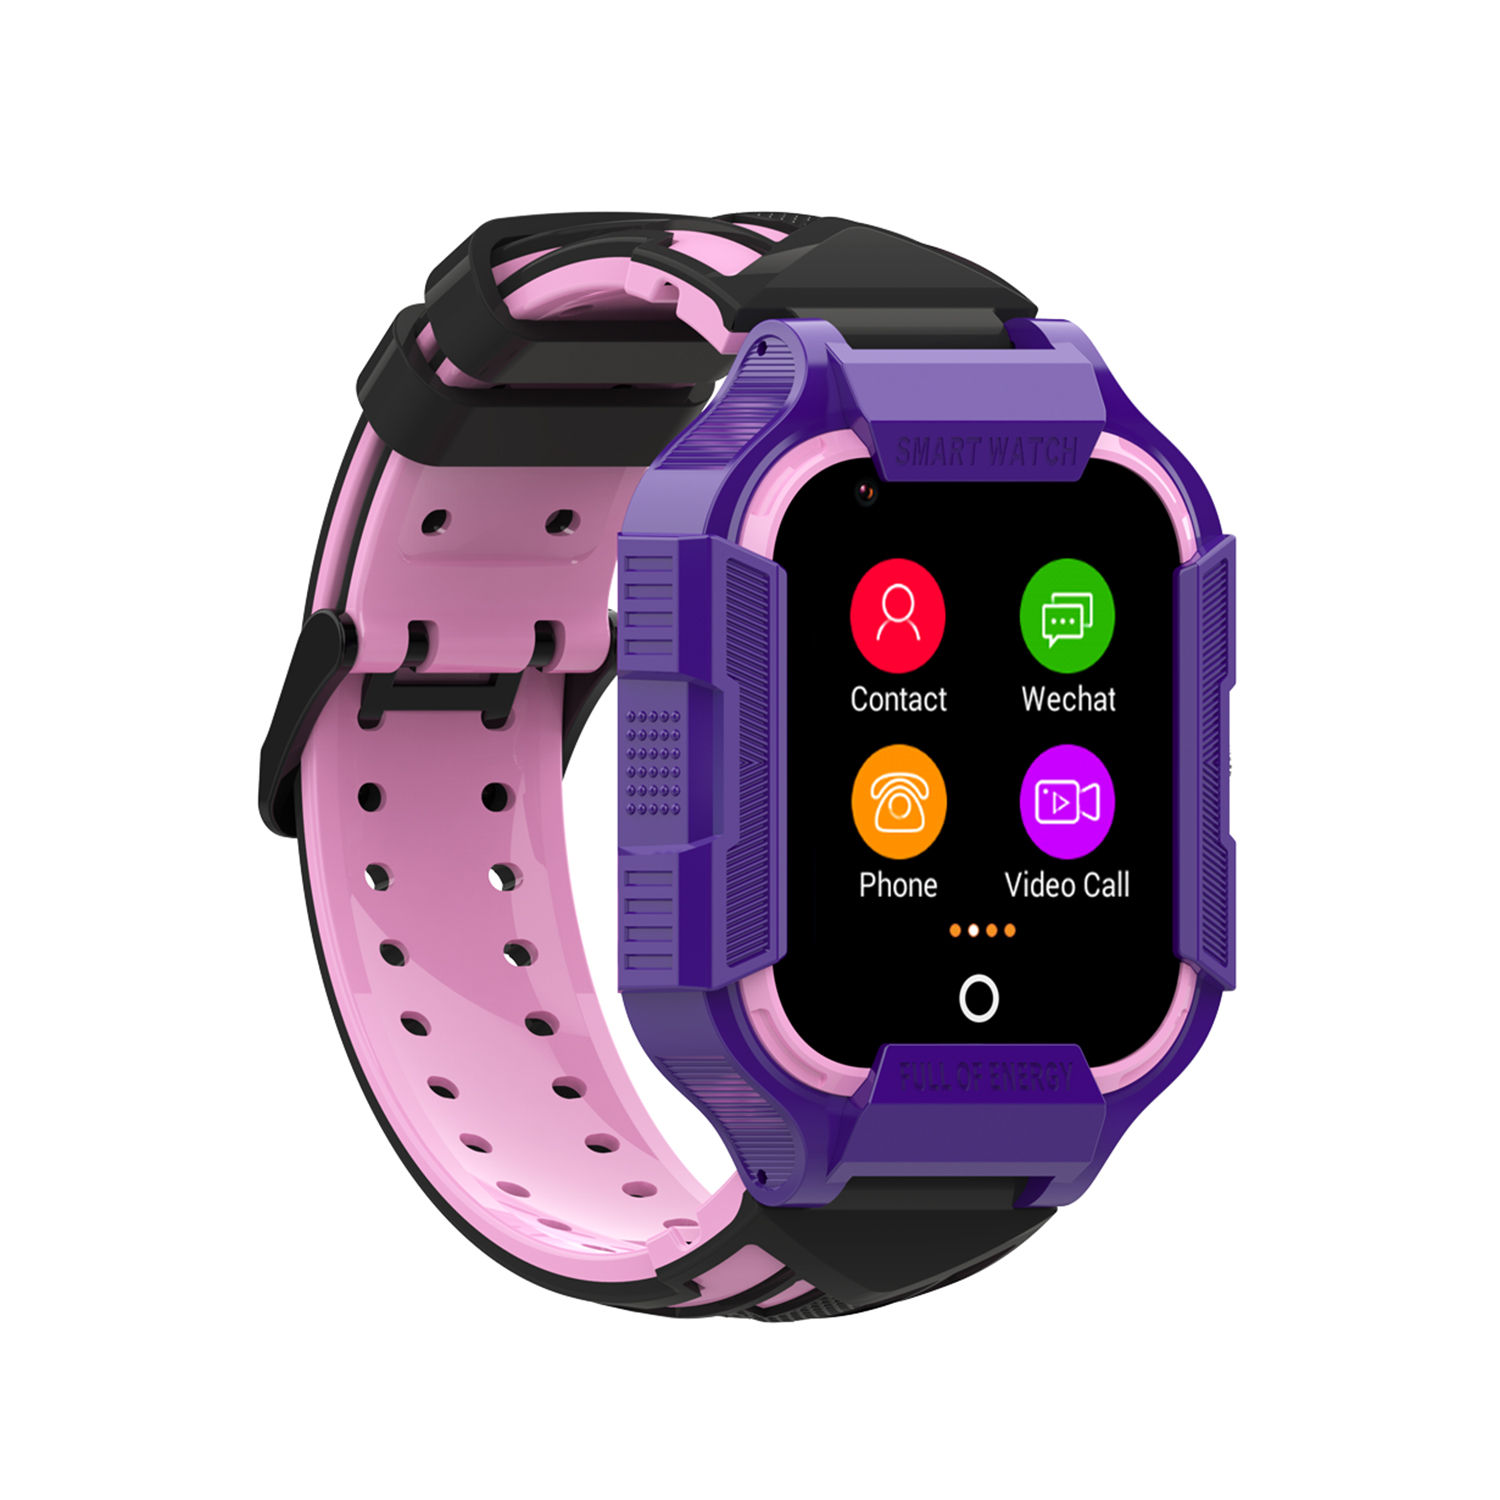 Quality LTE waterproof Students Watch Tracker with Video call GPS P41